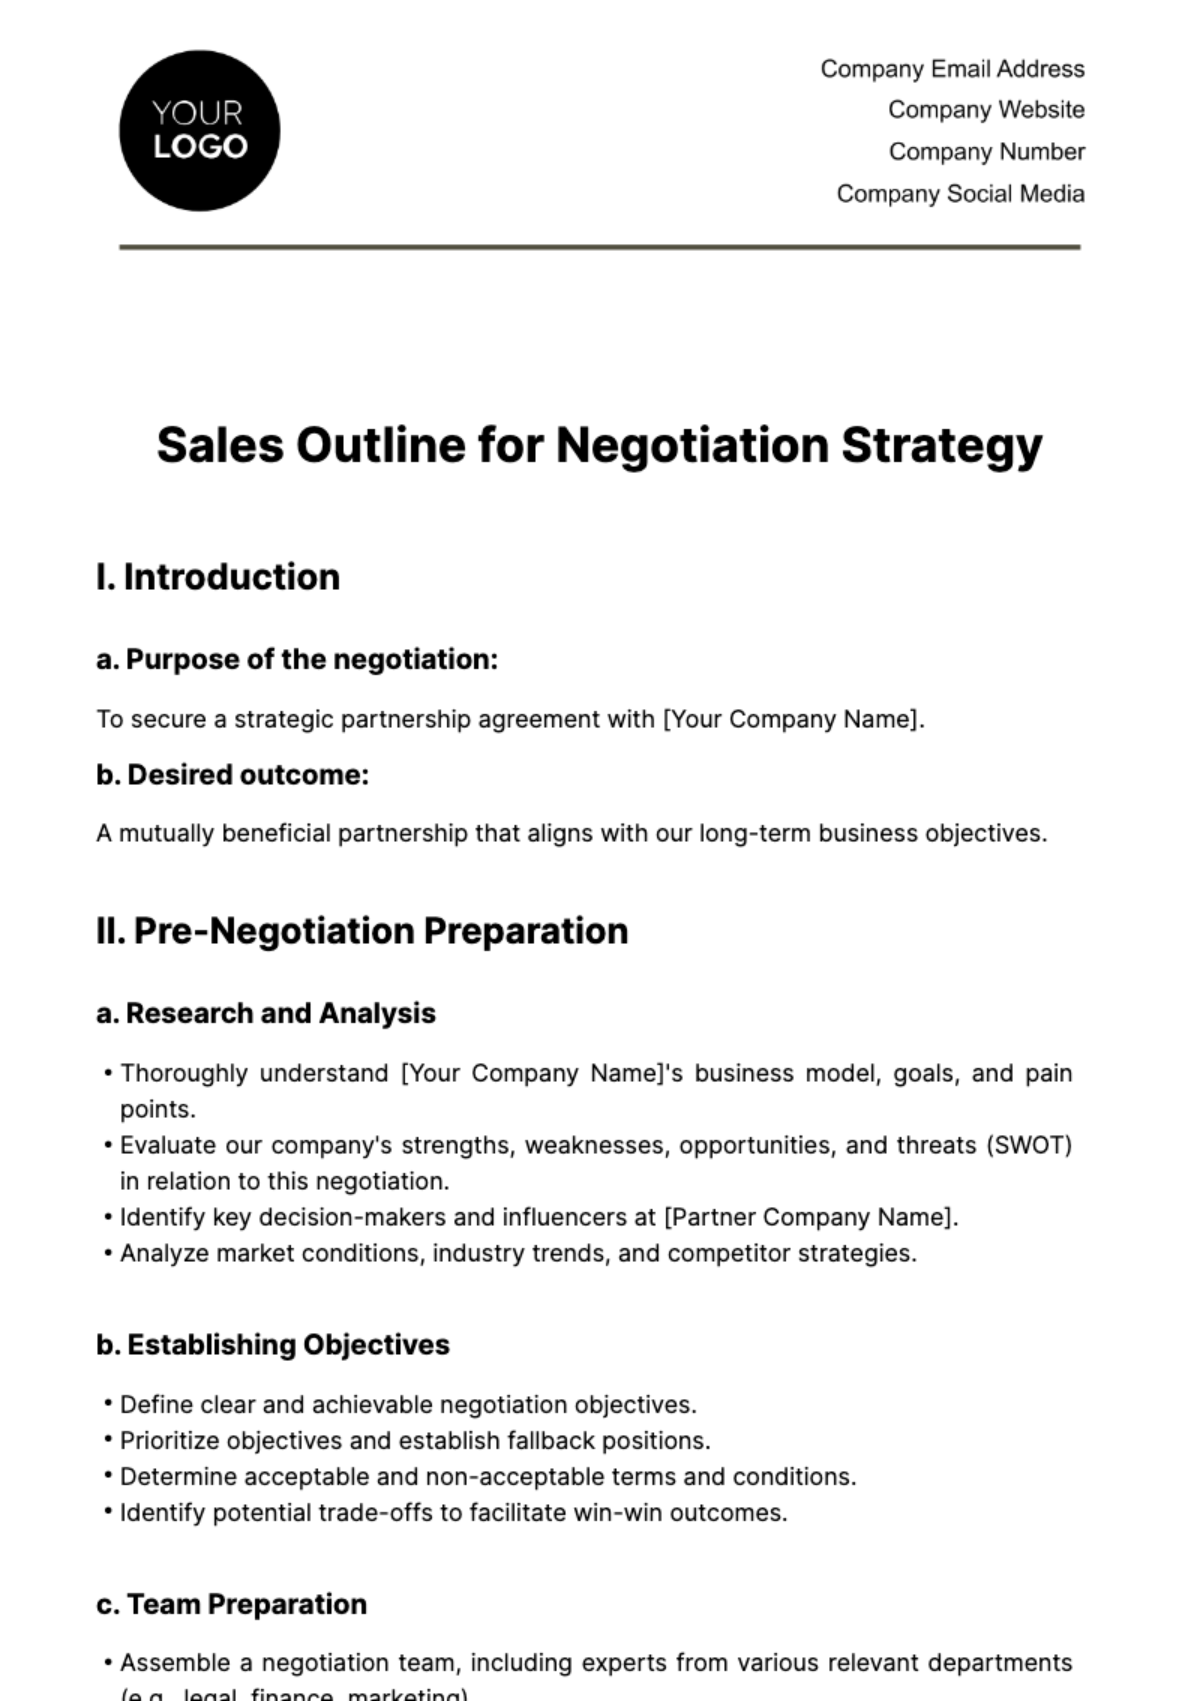 Sales Outline for Negotiation Strategy Template